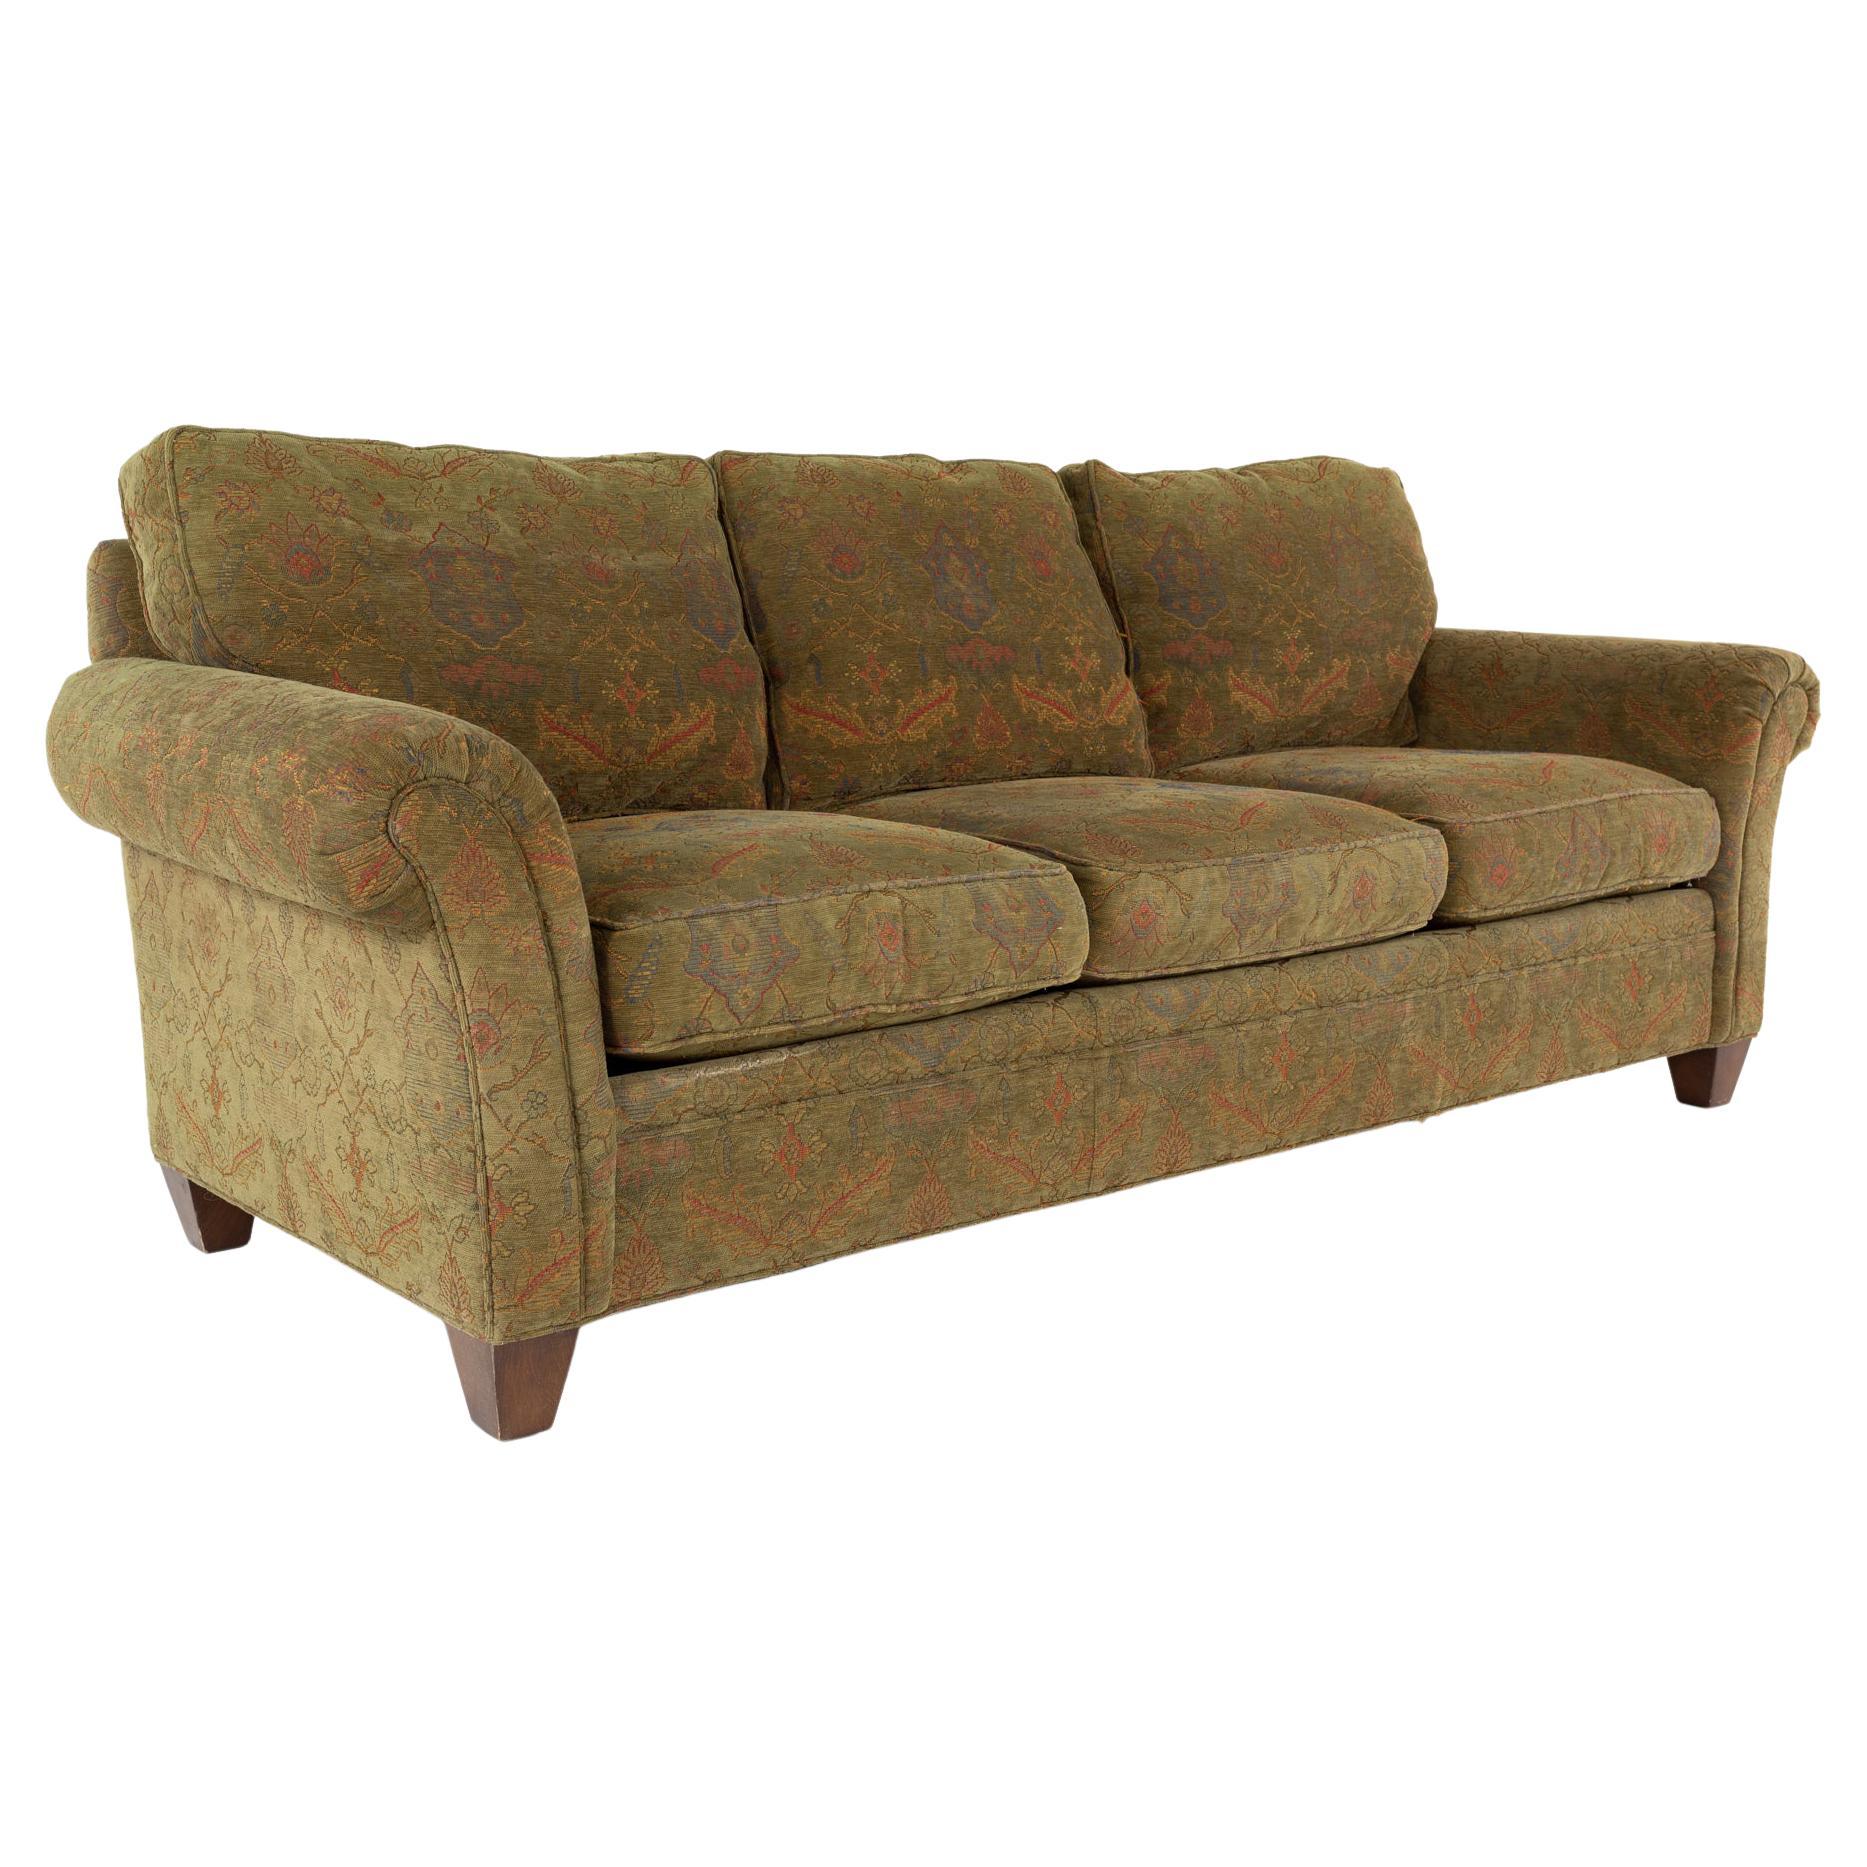 Mission Arts & Crafts Stickley Contemporary 3 Seat Sofa